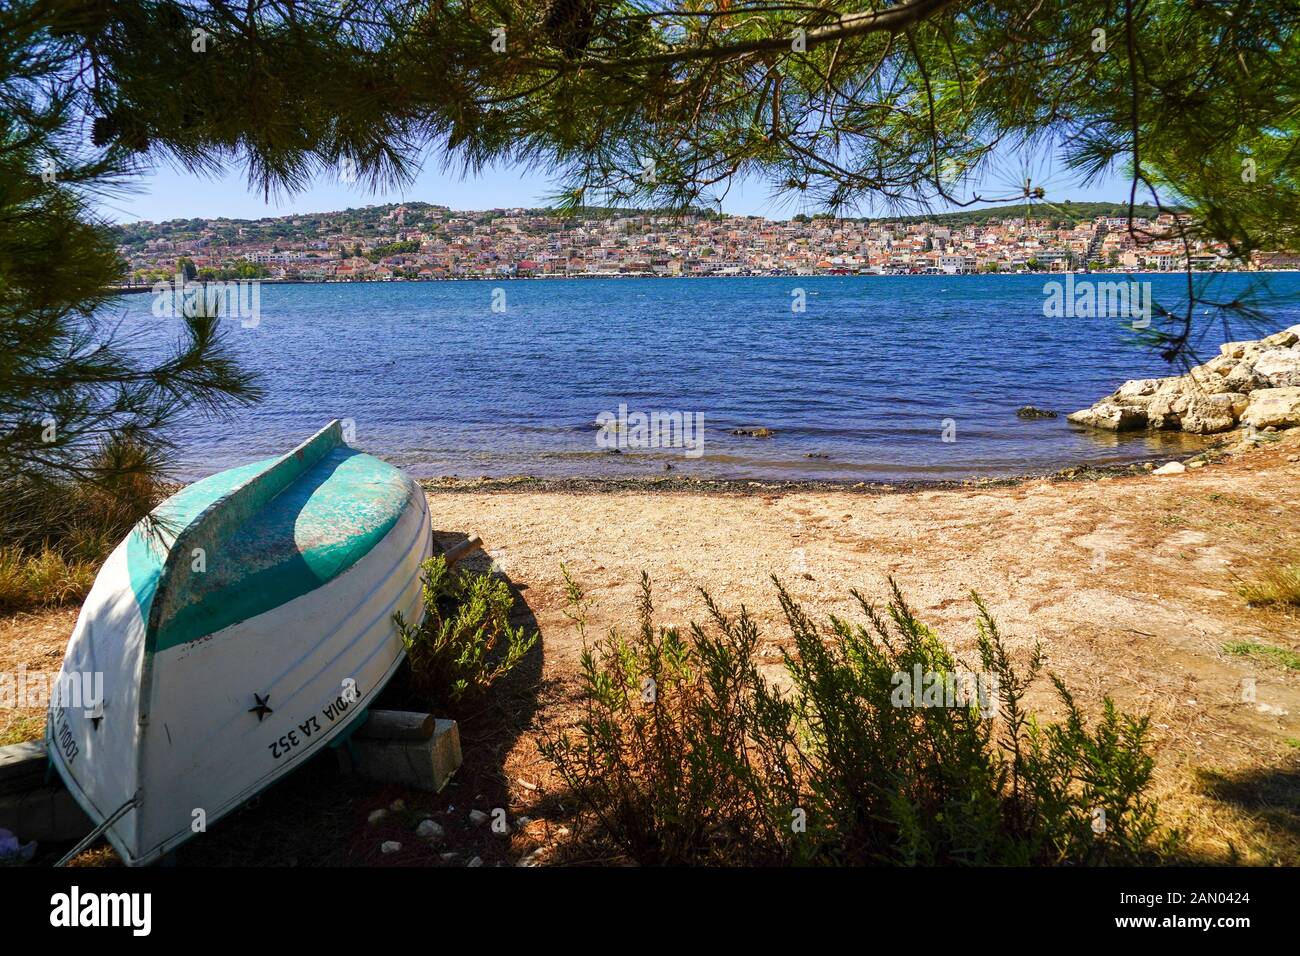 A deserted rowing boat on land Photographed on the Greek Island of Cephalonia, Ionian Sea, Greece Stock Photo